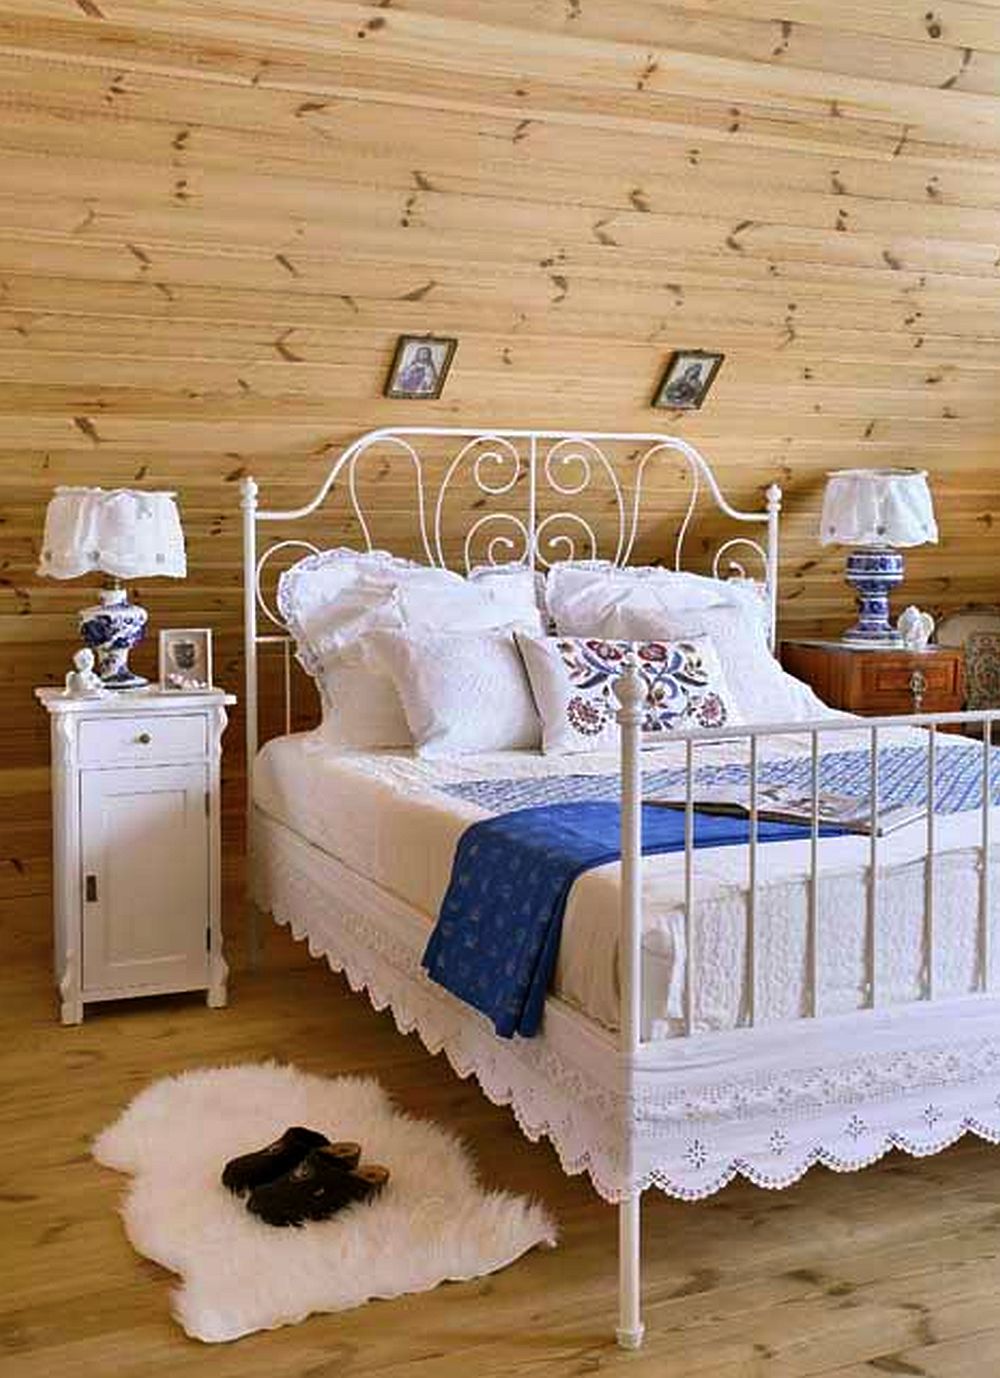 adelaparvu.com about rustic house in white and blue Photo Aneta Tryczynska(11)